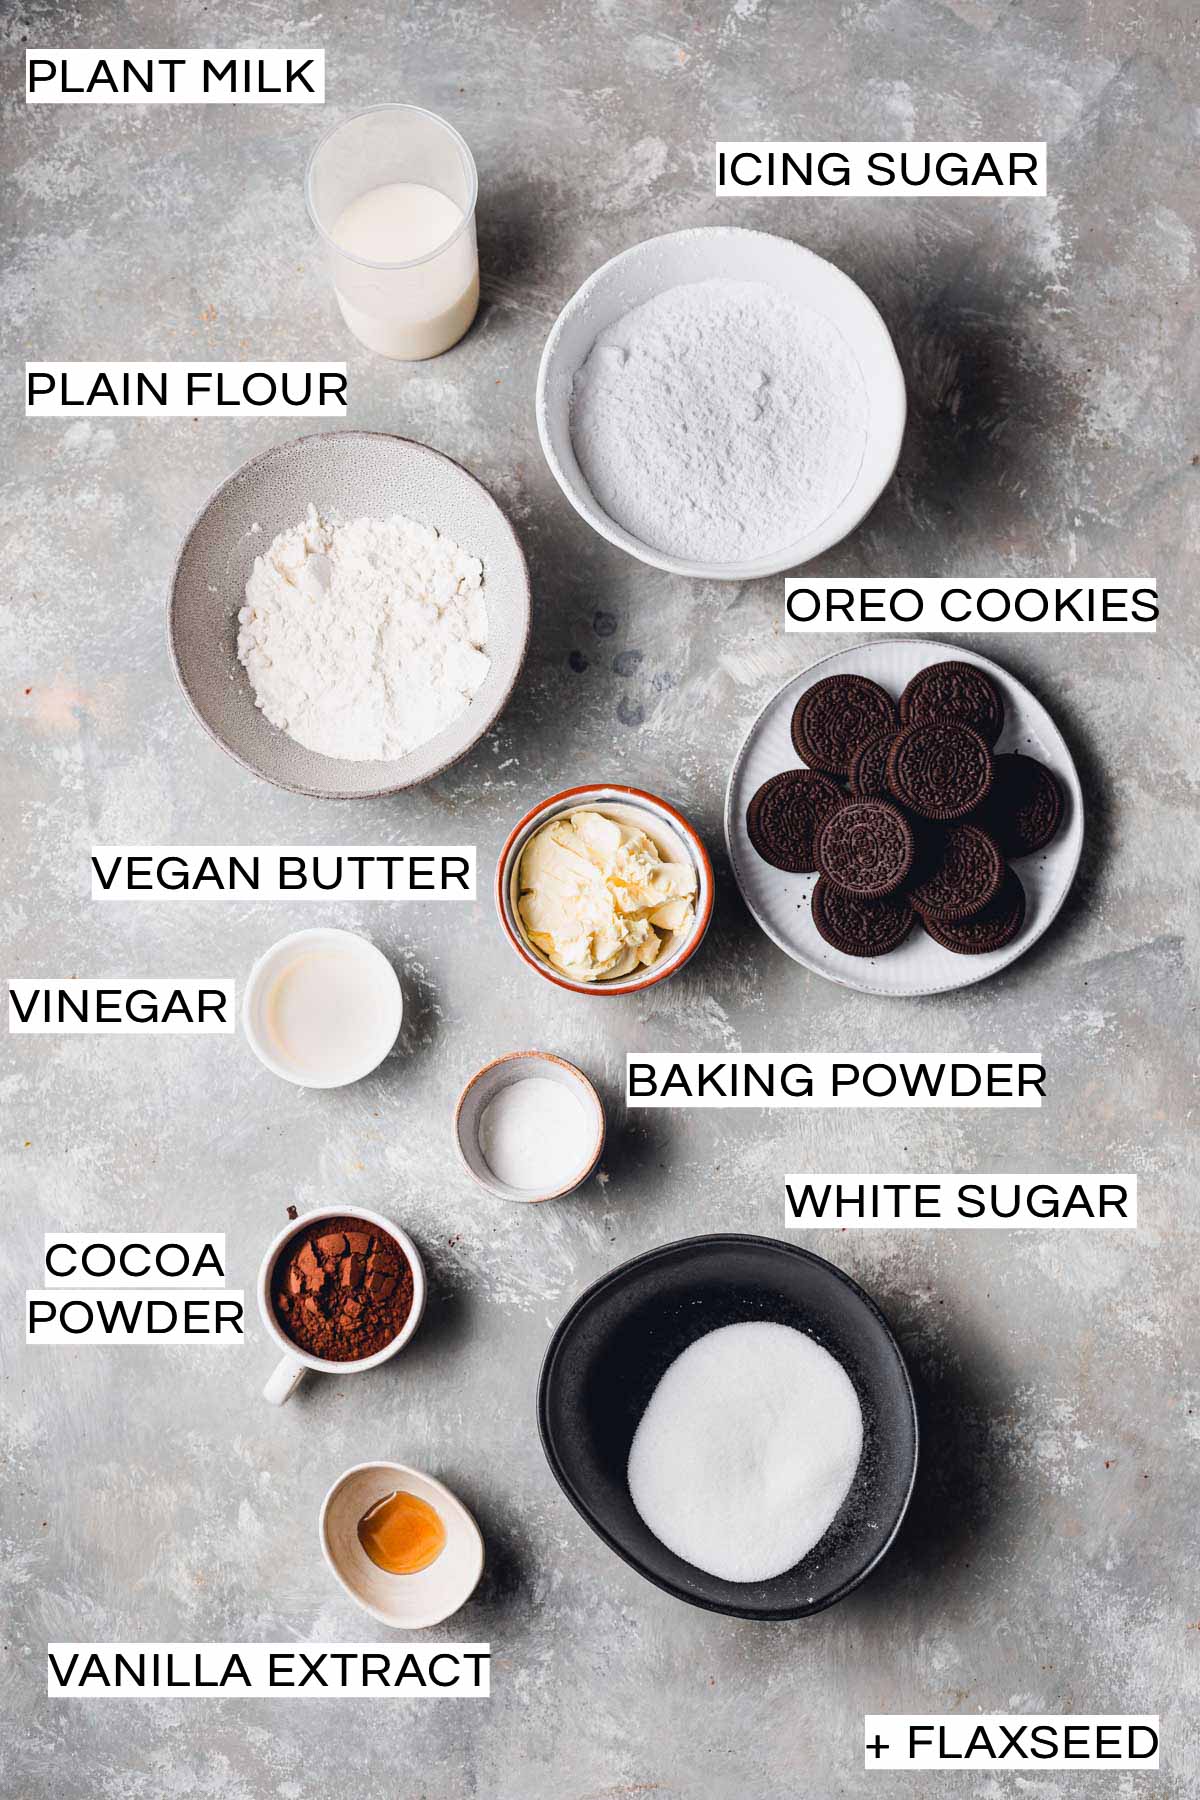 All ingredients needed to bake Oreo cupcakes laid out in bowls on